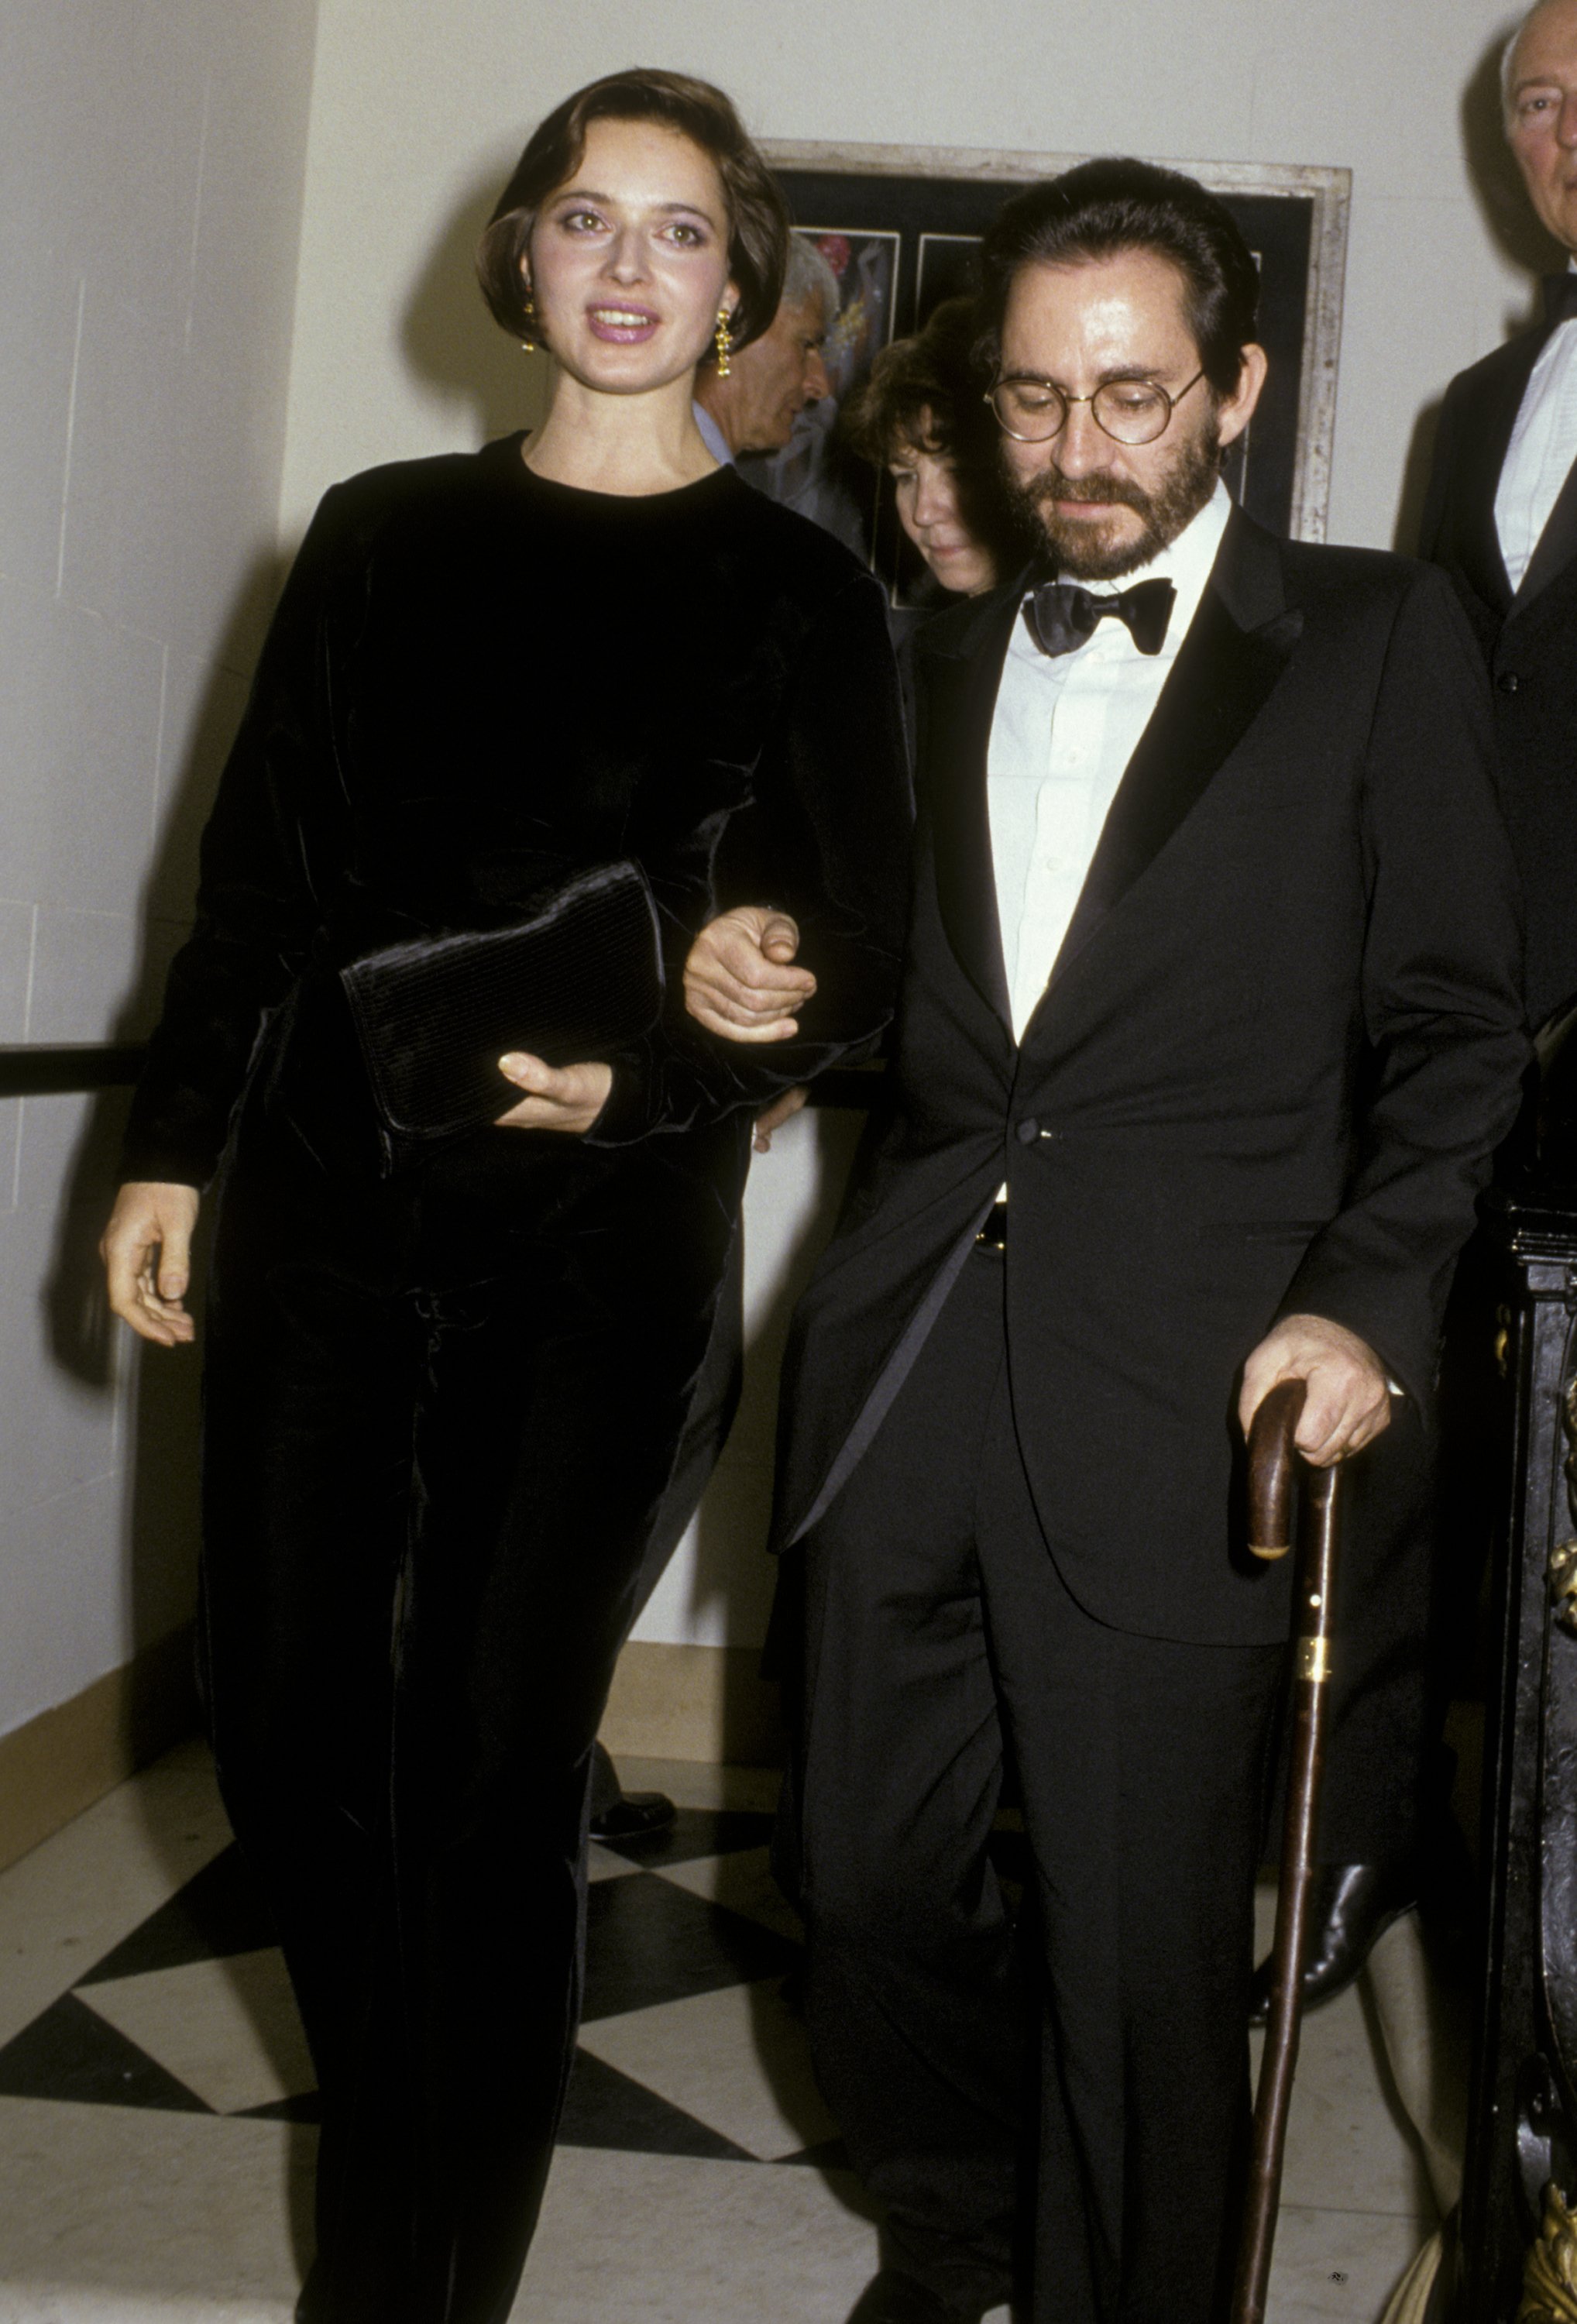 Isabella Rossellini and Renzo Rossellini at the premiere party for "White Nights" on November 13, 1985, in New York | Source: Getty Images